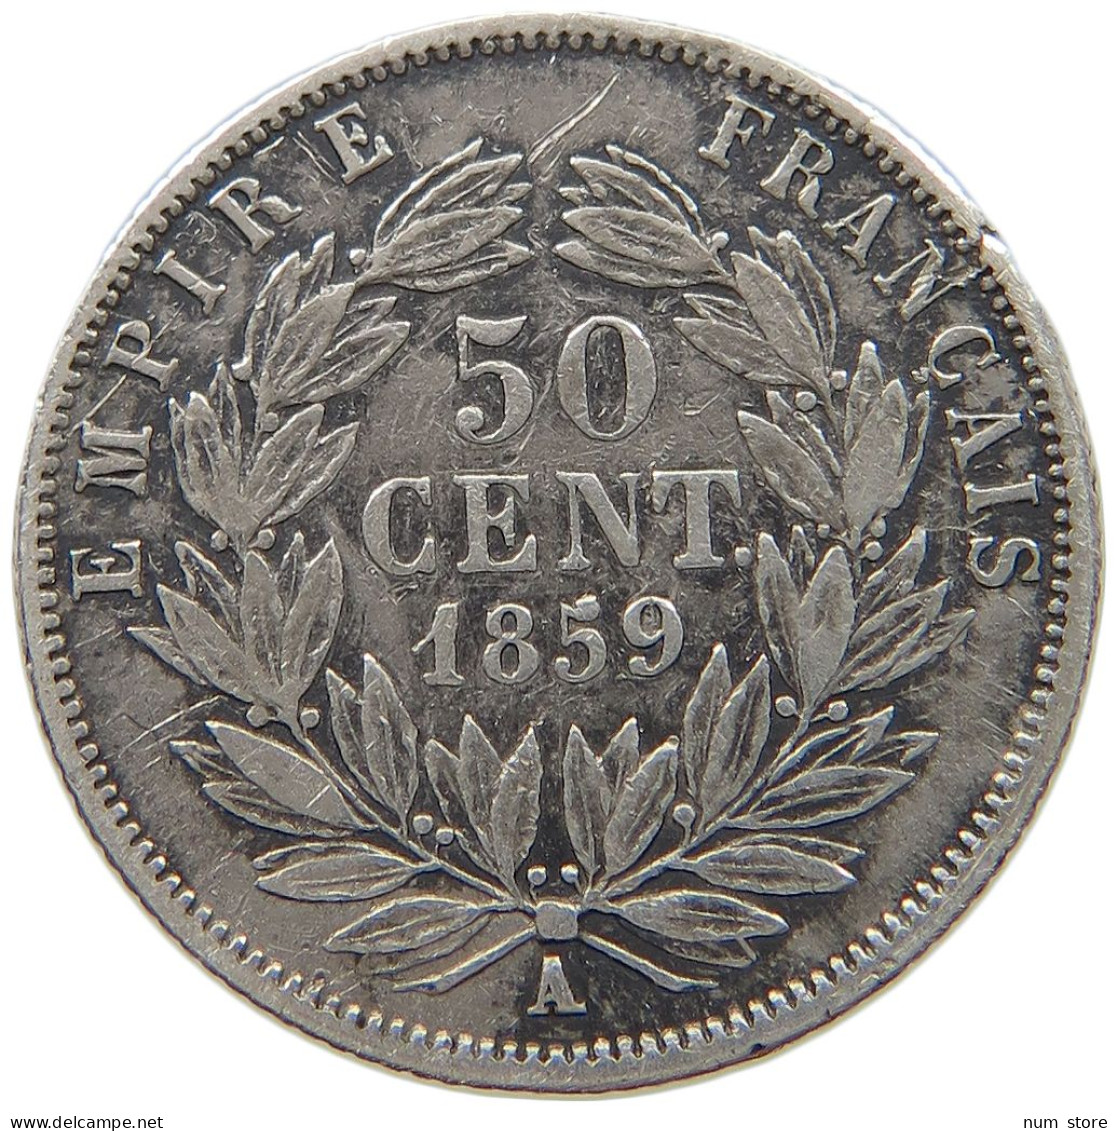 FRANCE 50 CENTIMES 1859 A Napoleon III. (1852-1870) #a002 0163 - 50 Centimes